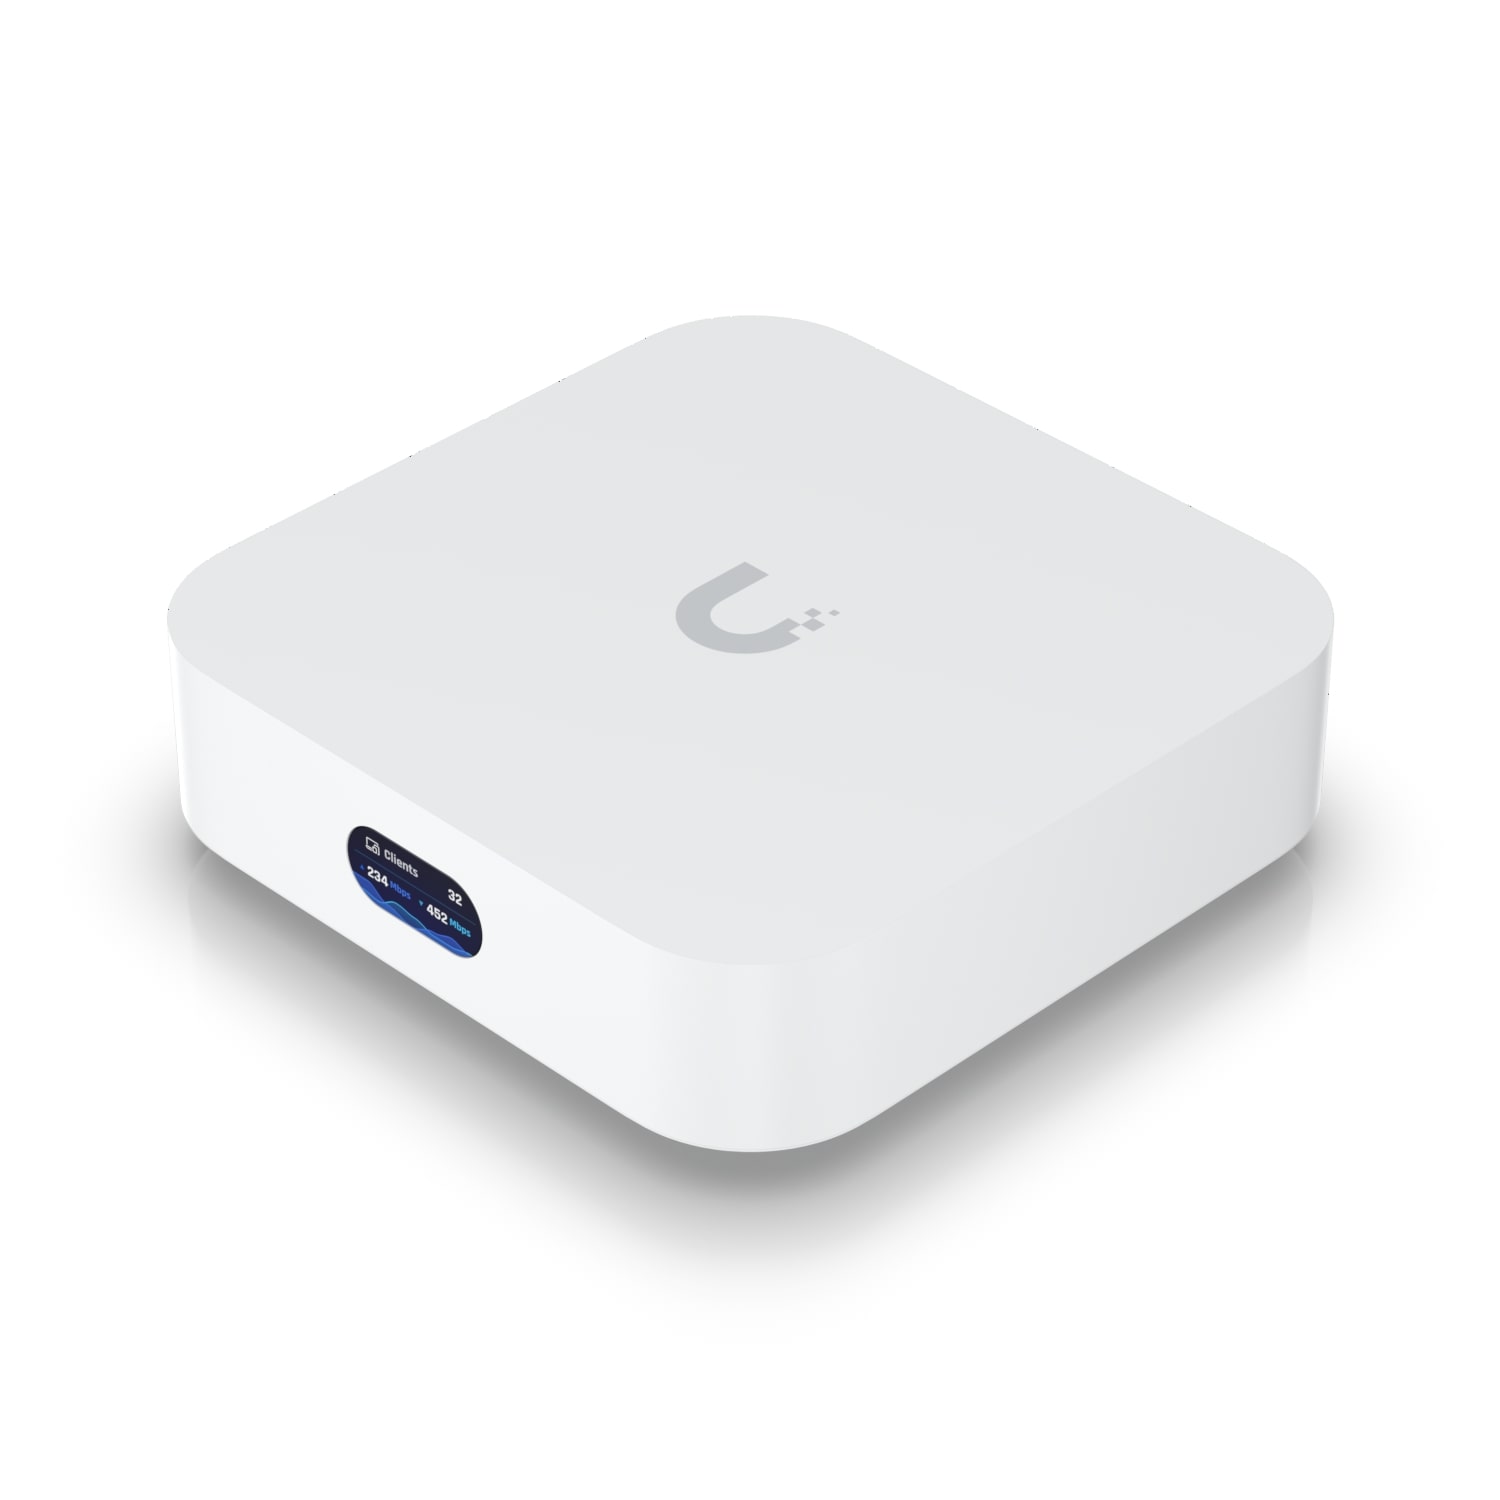  UniFi Express, Powerfully Compact UniFi Cloud Gateway And WiFi 6 Access Point, 140 m&#178; Single-unit Coverage, 60+ devices, 1 GbE RJ45 WAN  